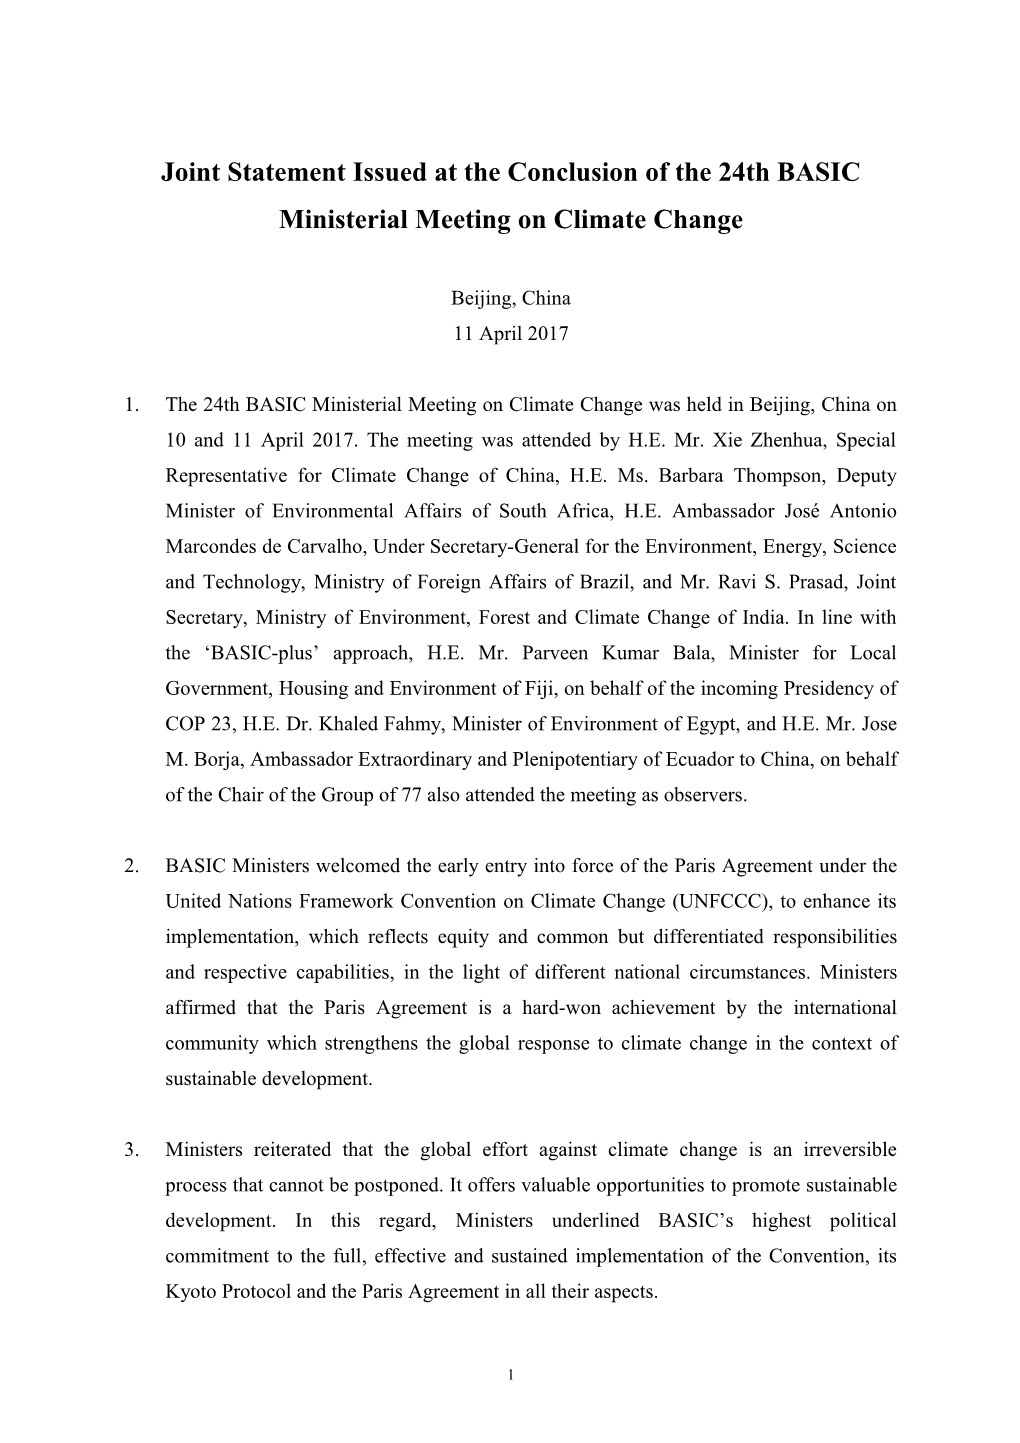 Joint Statement Issued at the Conclusion of the 24Th BASIC Ministerial Meeting on Climate